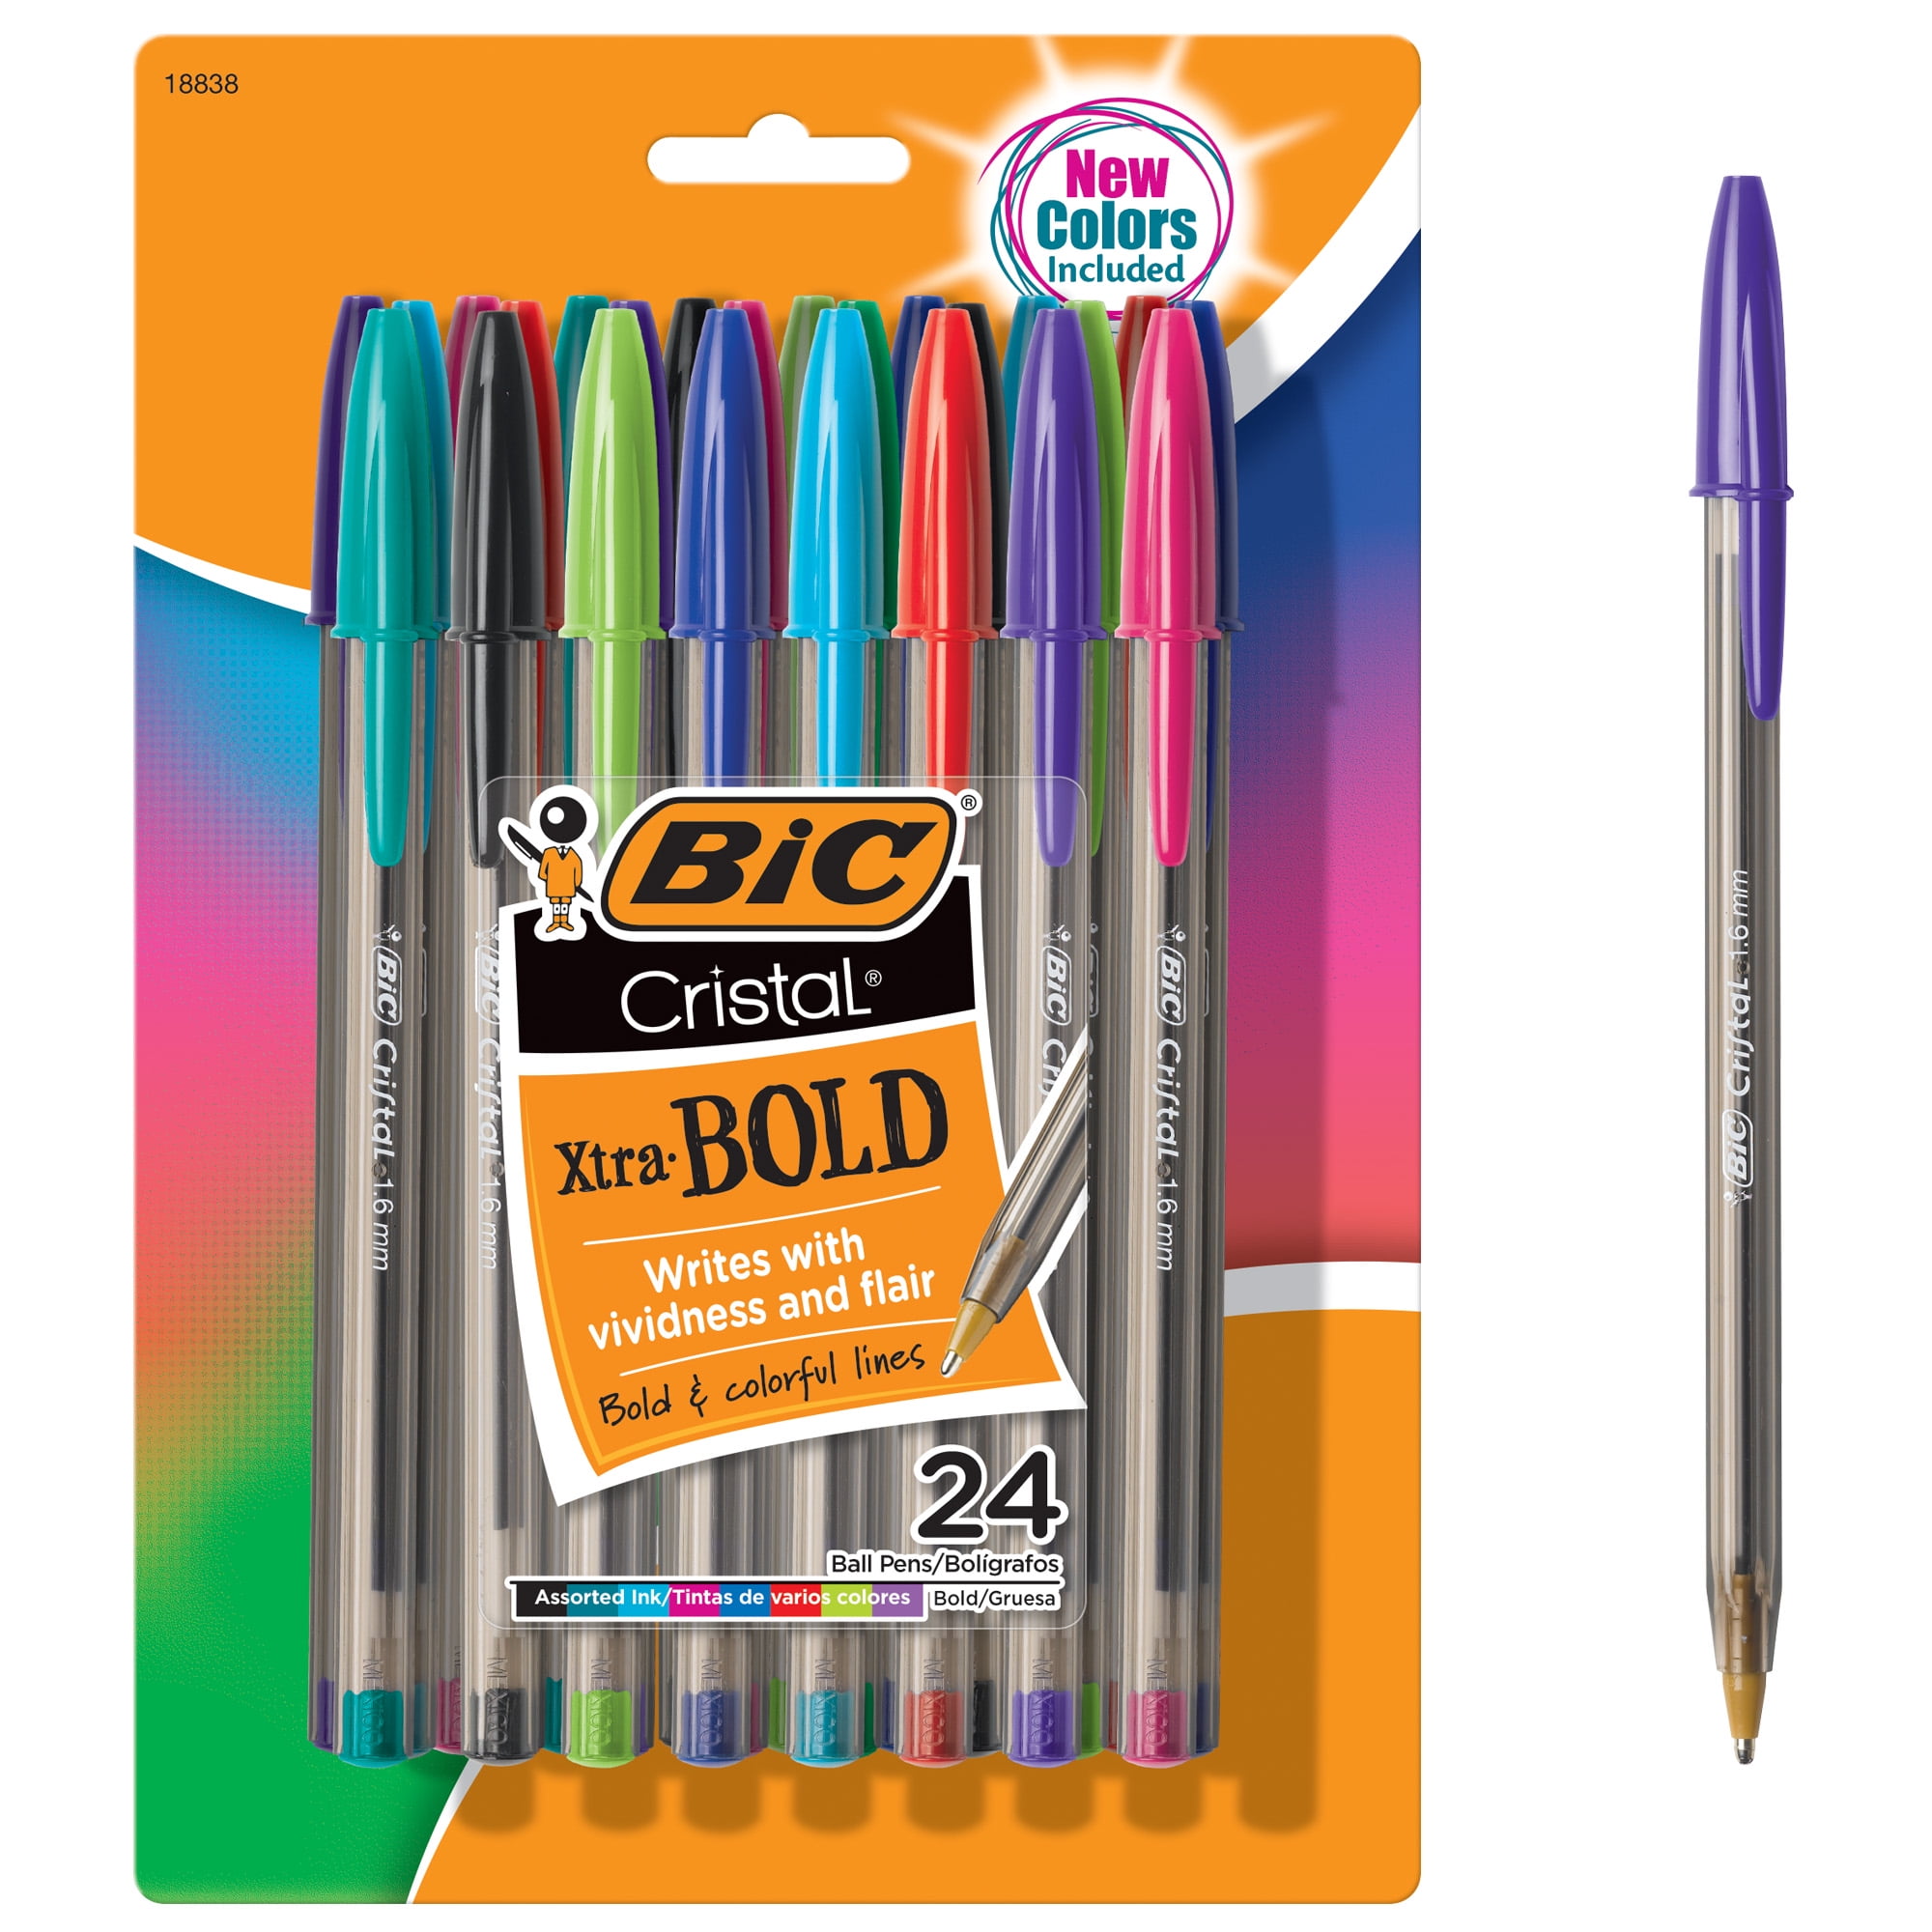 BIC Cristal Xtra Bold Ballpoint Pen Blue Bold Point 1.6mm 12-Count 